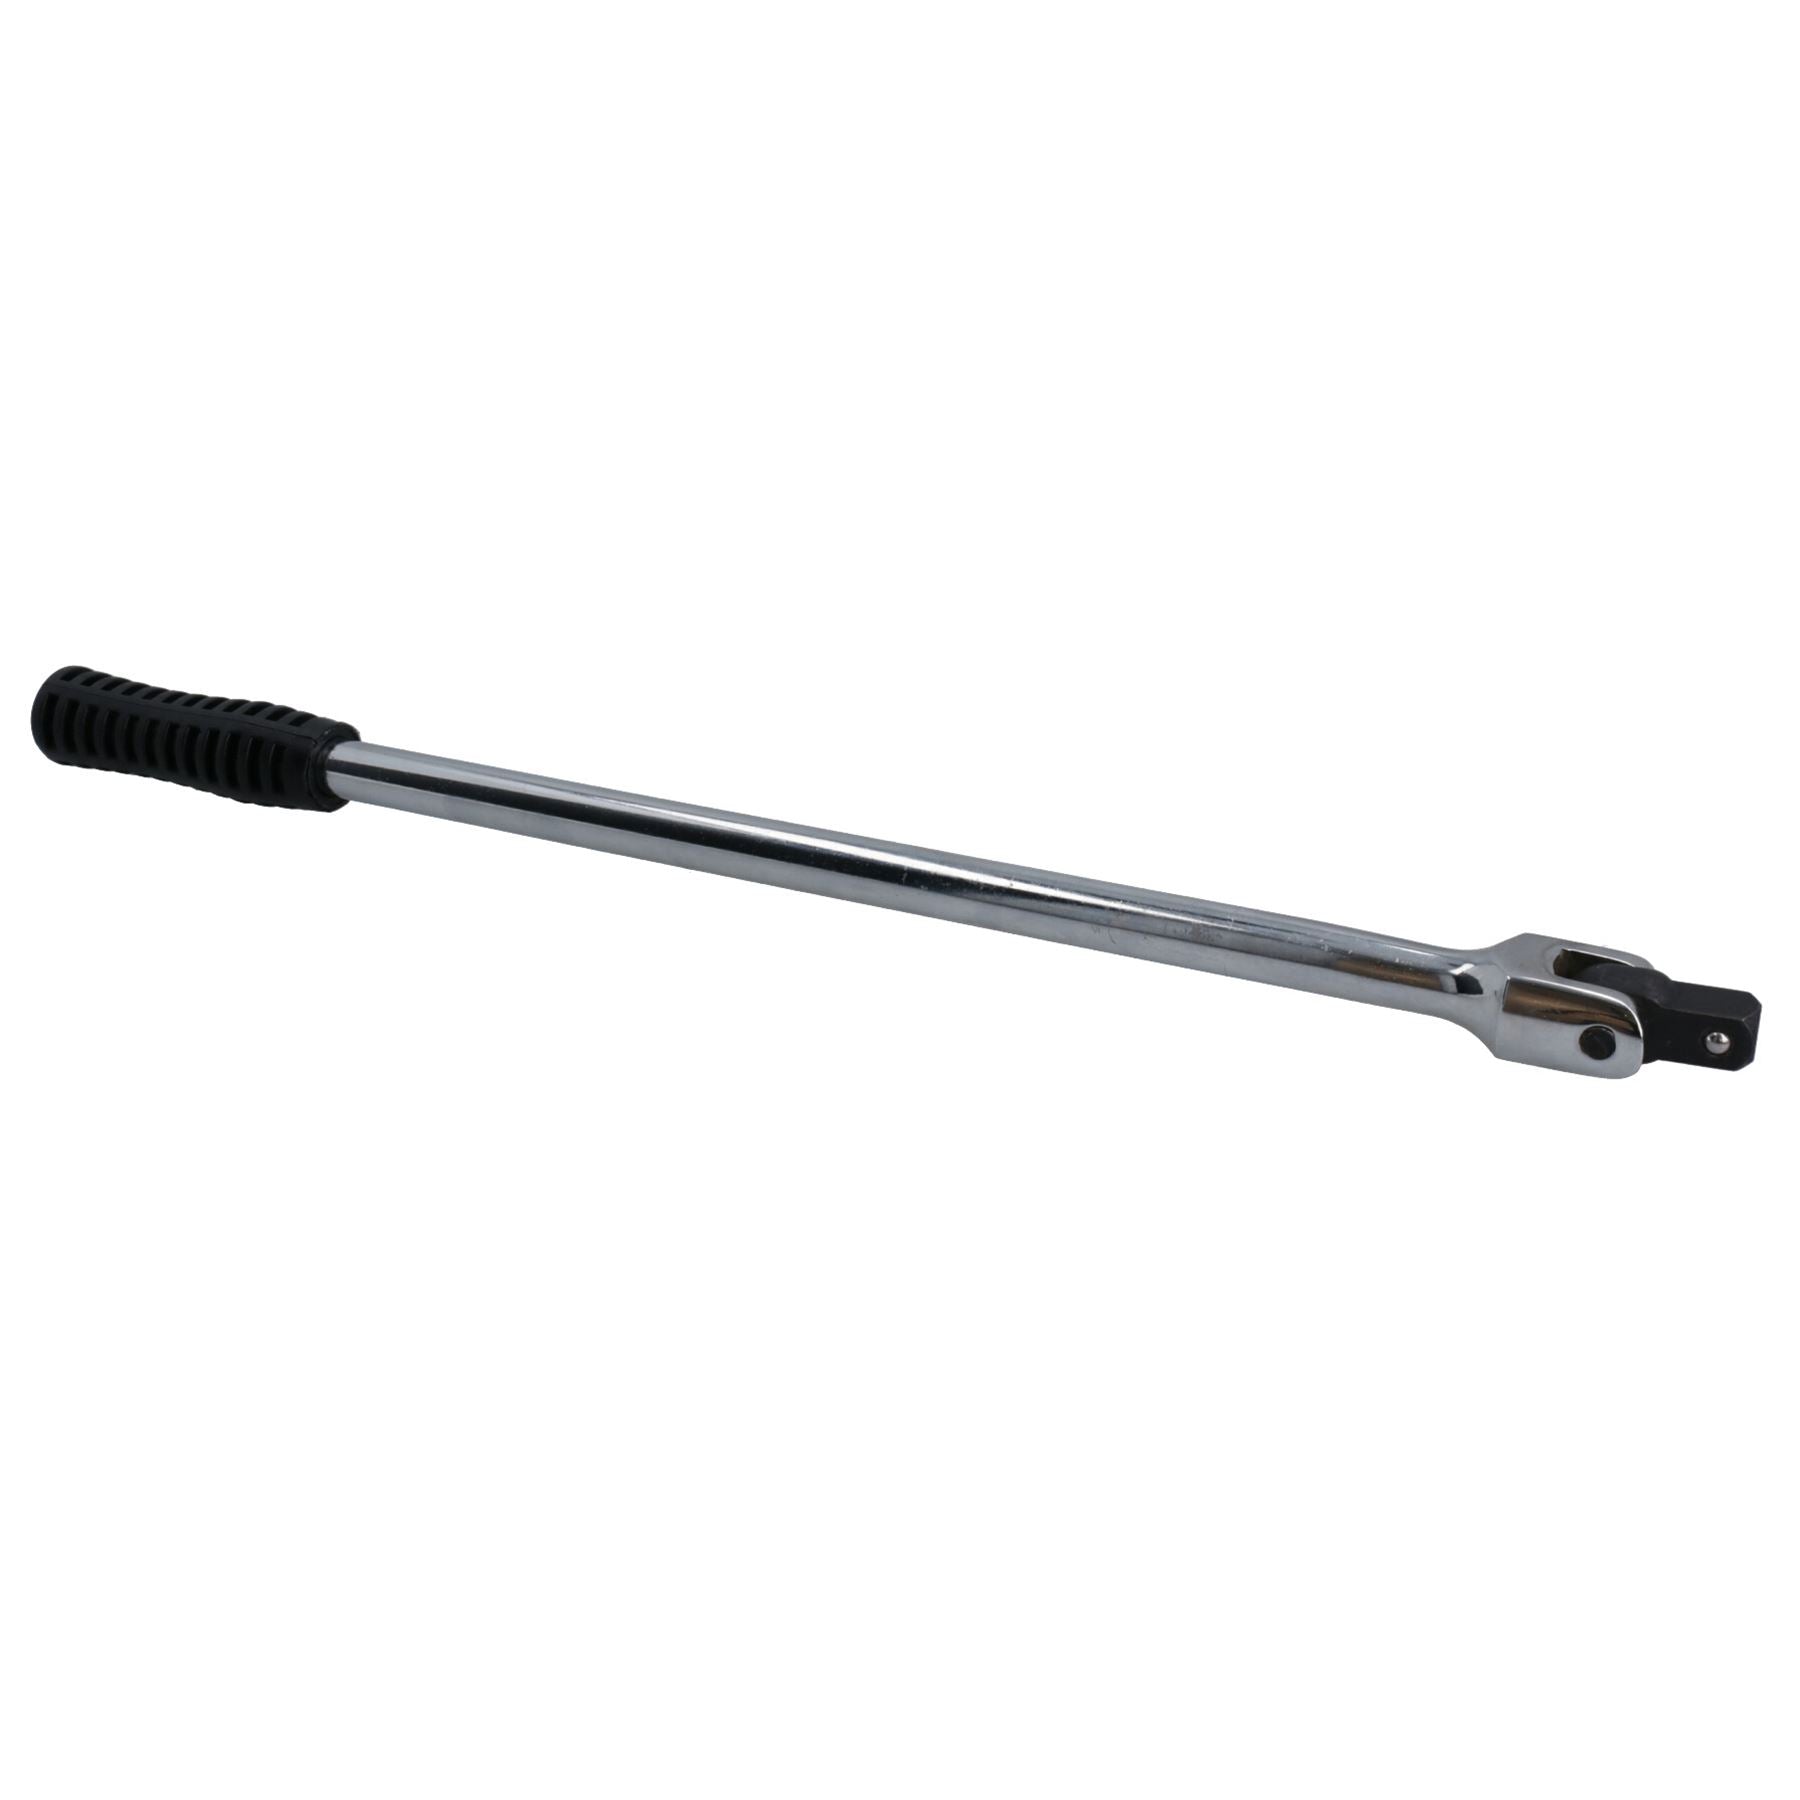 1/2" Drive Breaker / Power Bar 18" / 455mm with Rubber Handle Wrench TE539